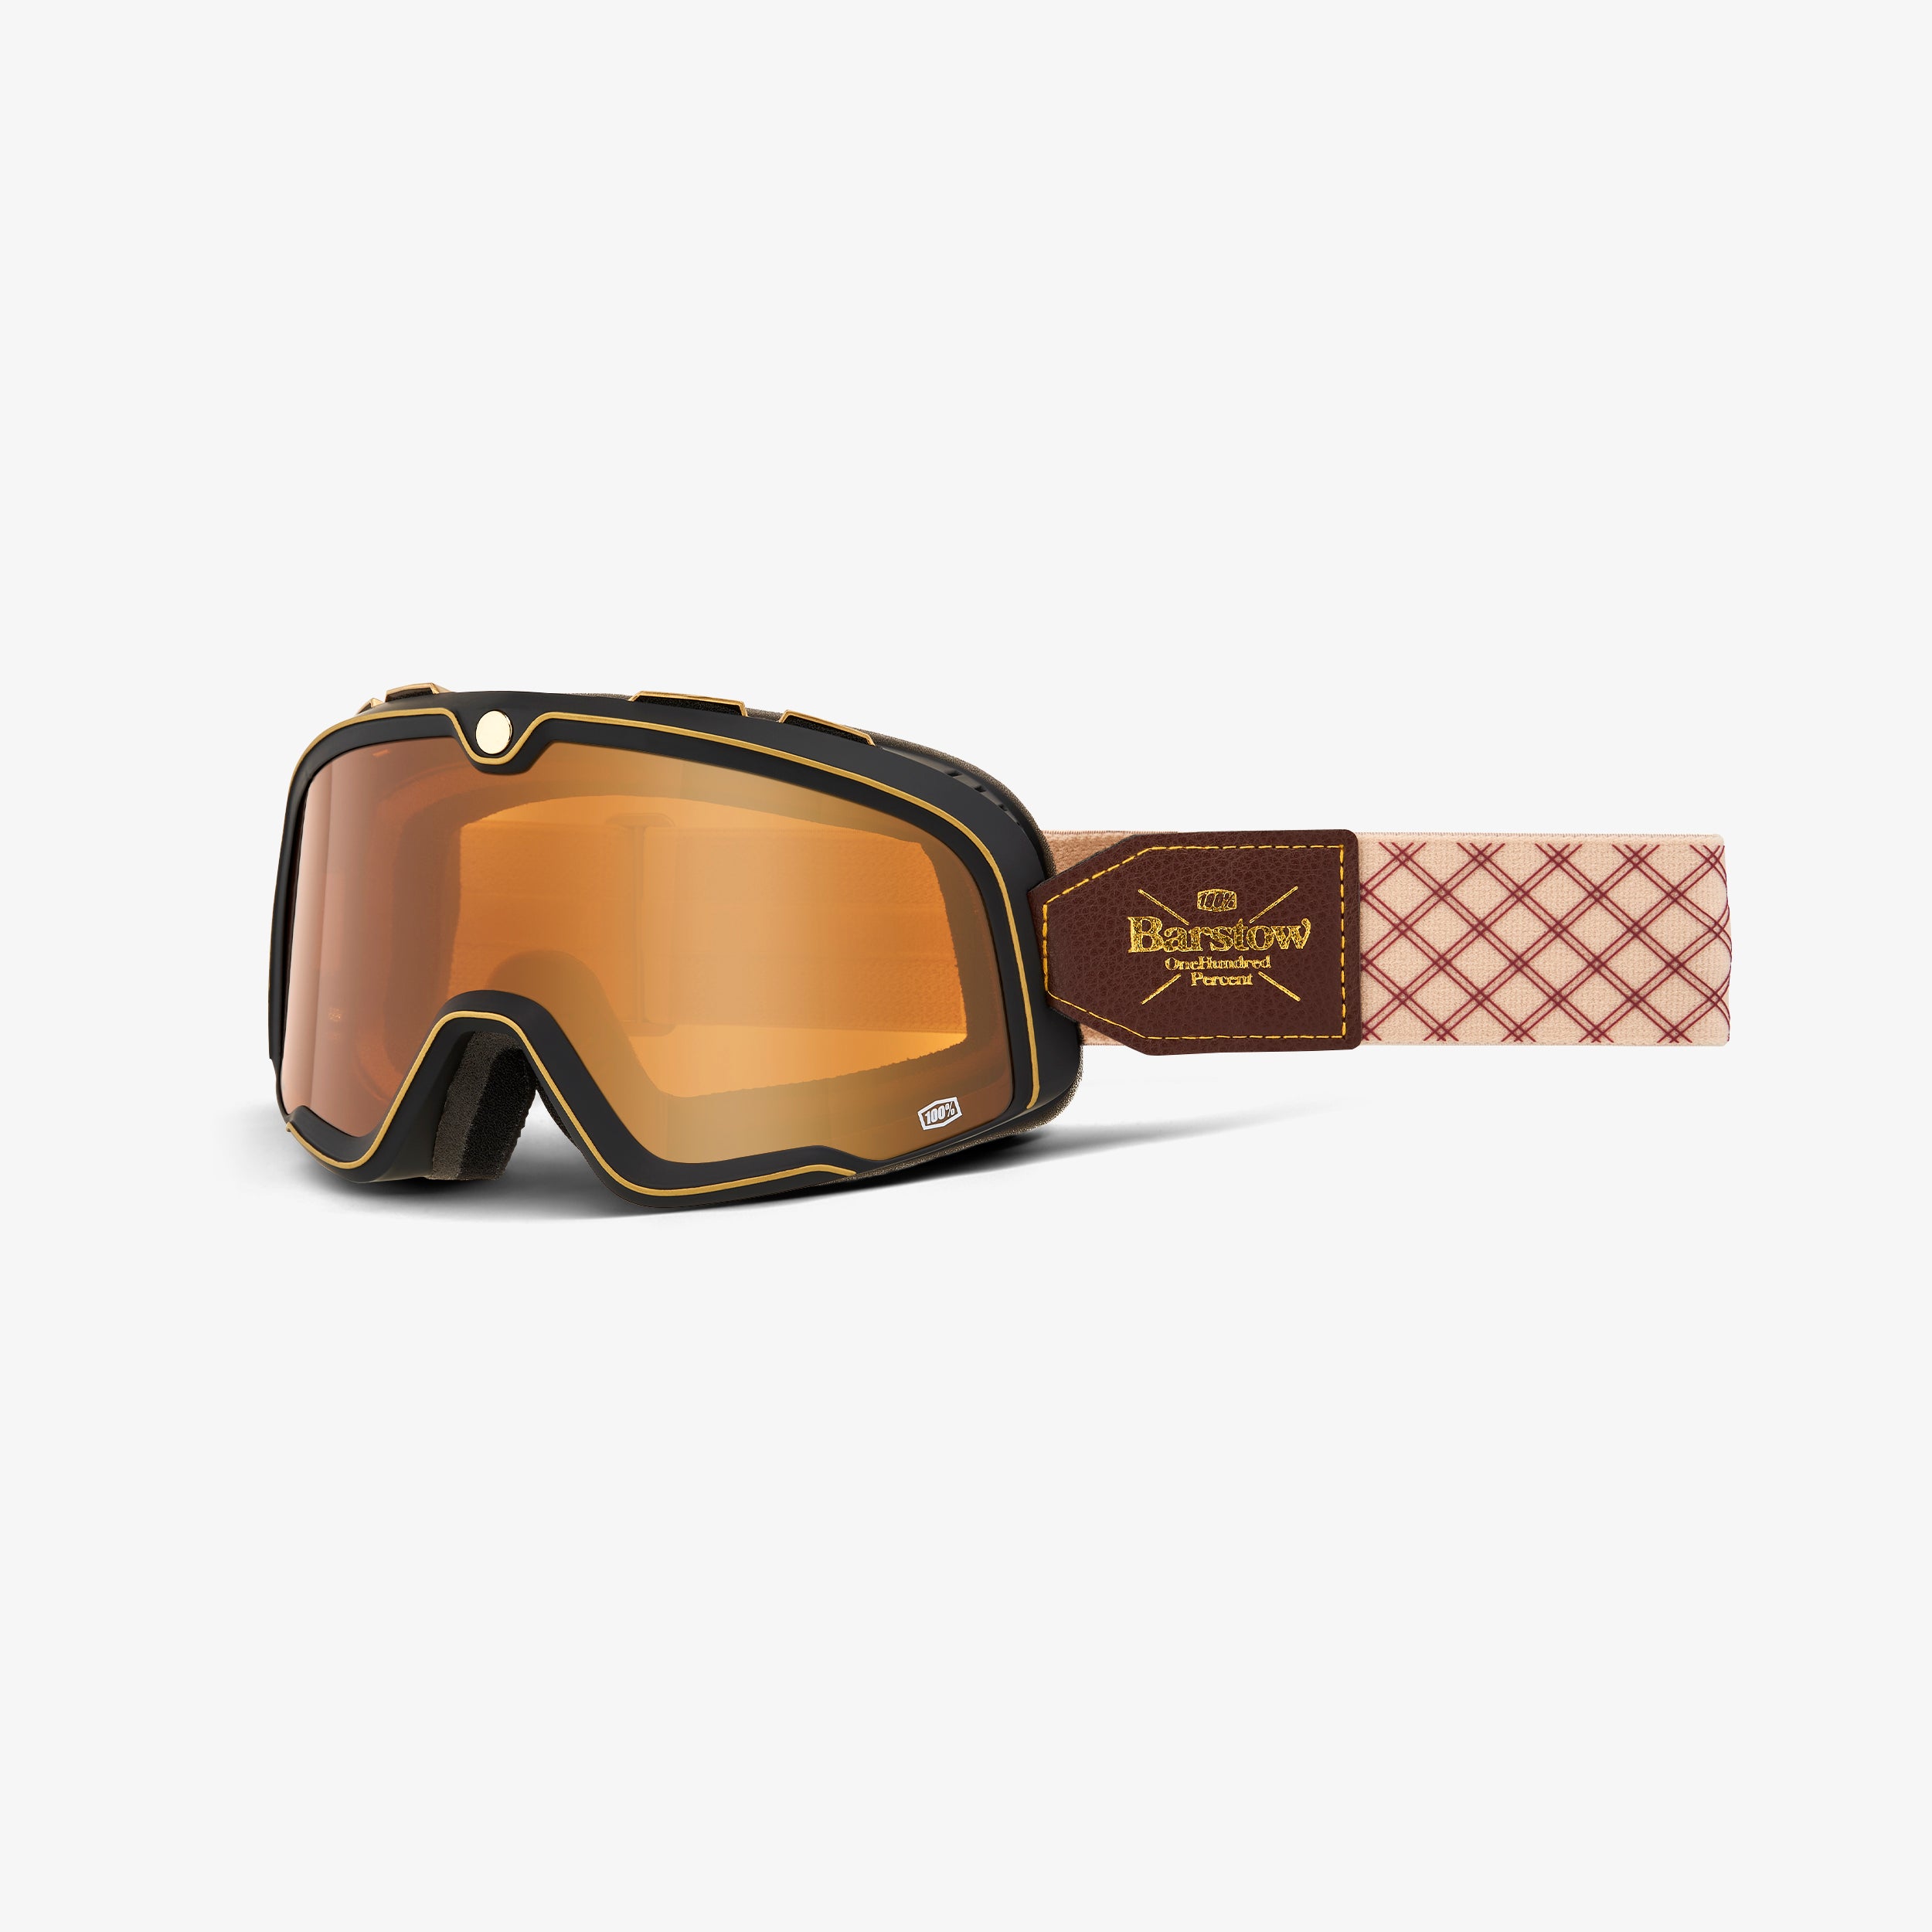 BARSTOW Goggle Solace - Persimmon Lens